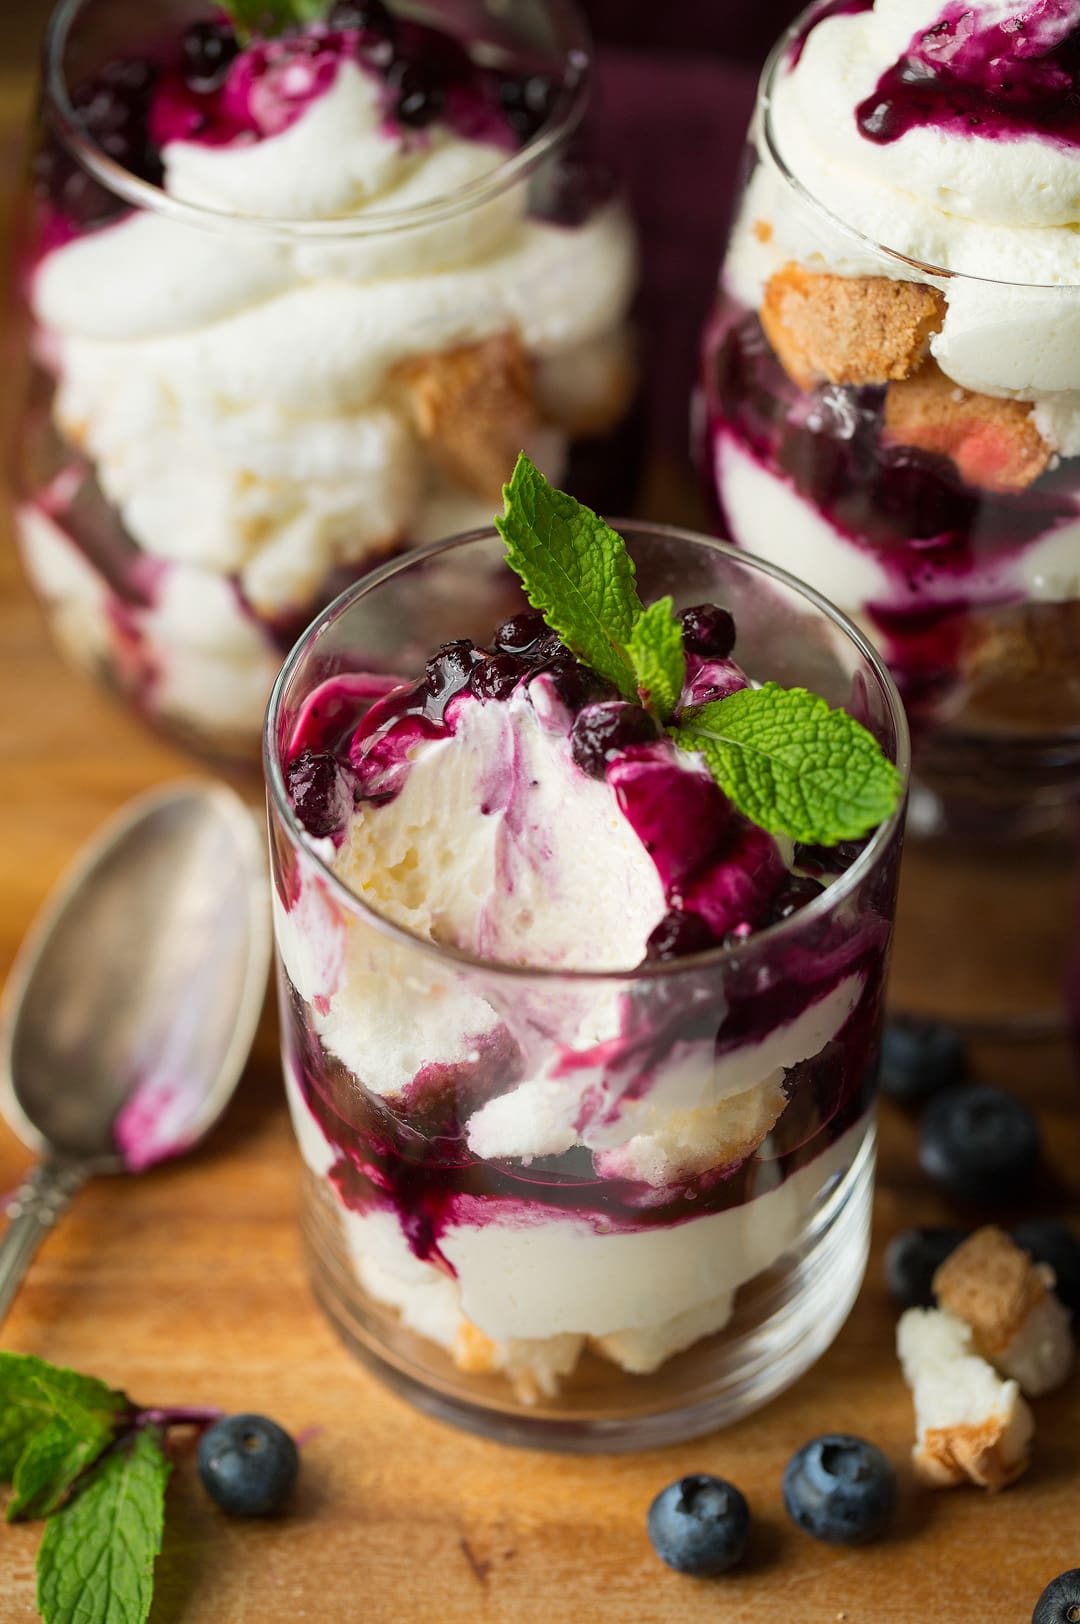 Image shows three trifles. Closes trifle is showing a scoop missing from it to show layers including angel food cake, cheesecake topping and blueberry sauce.